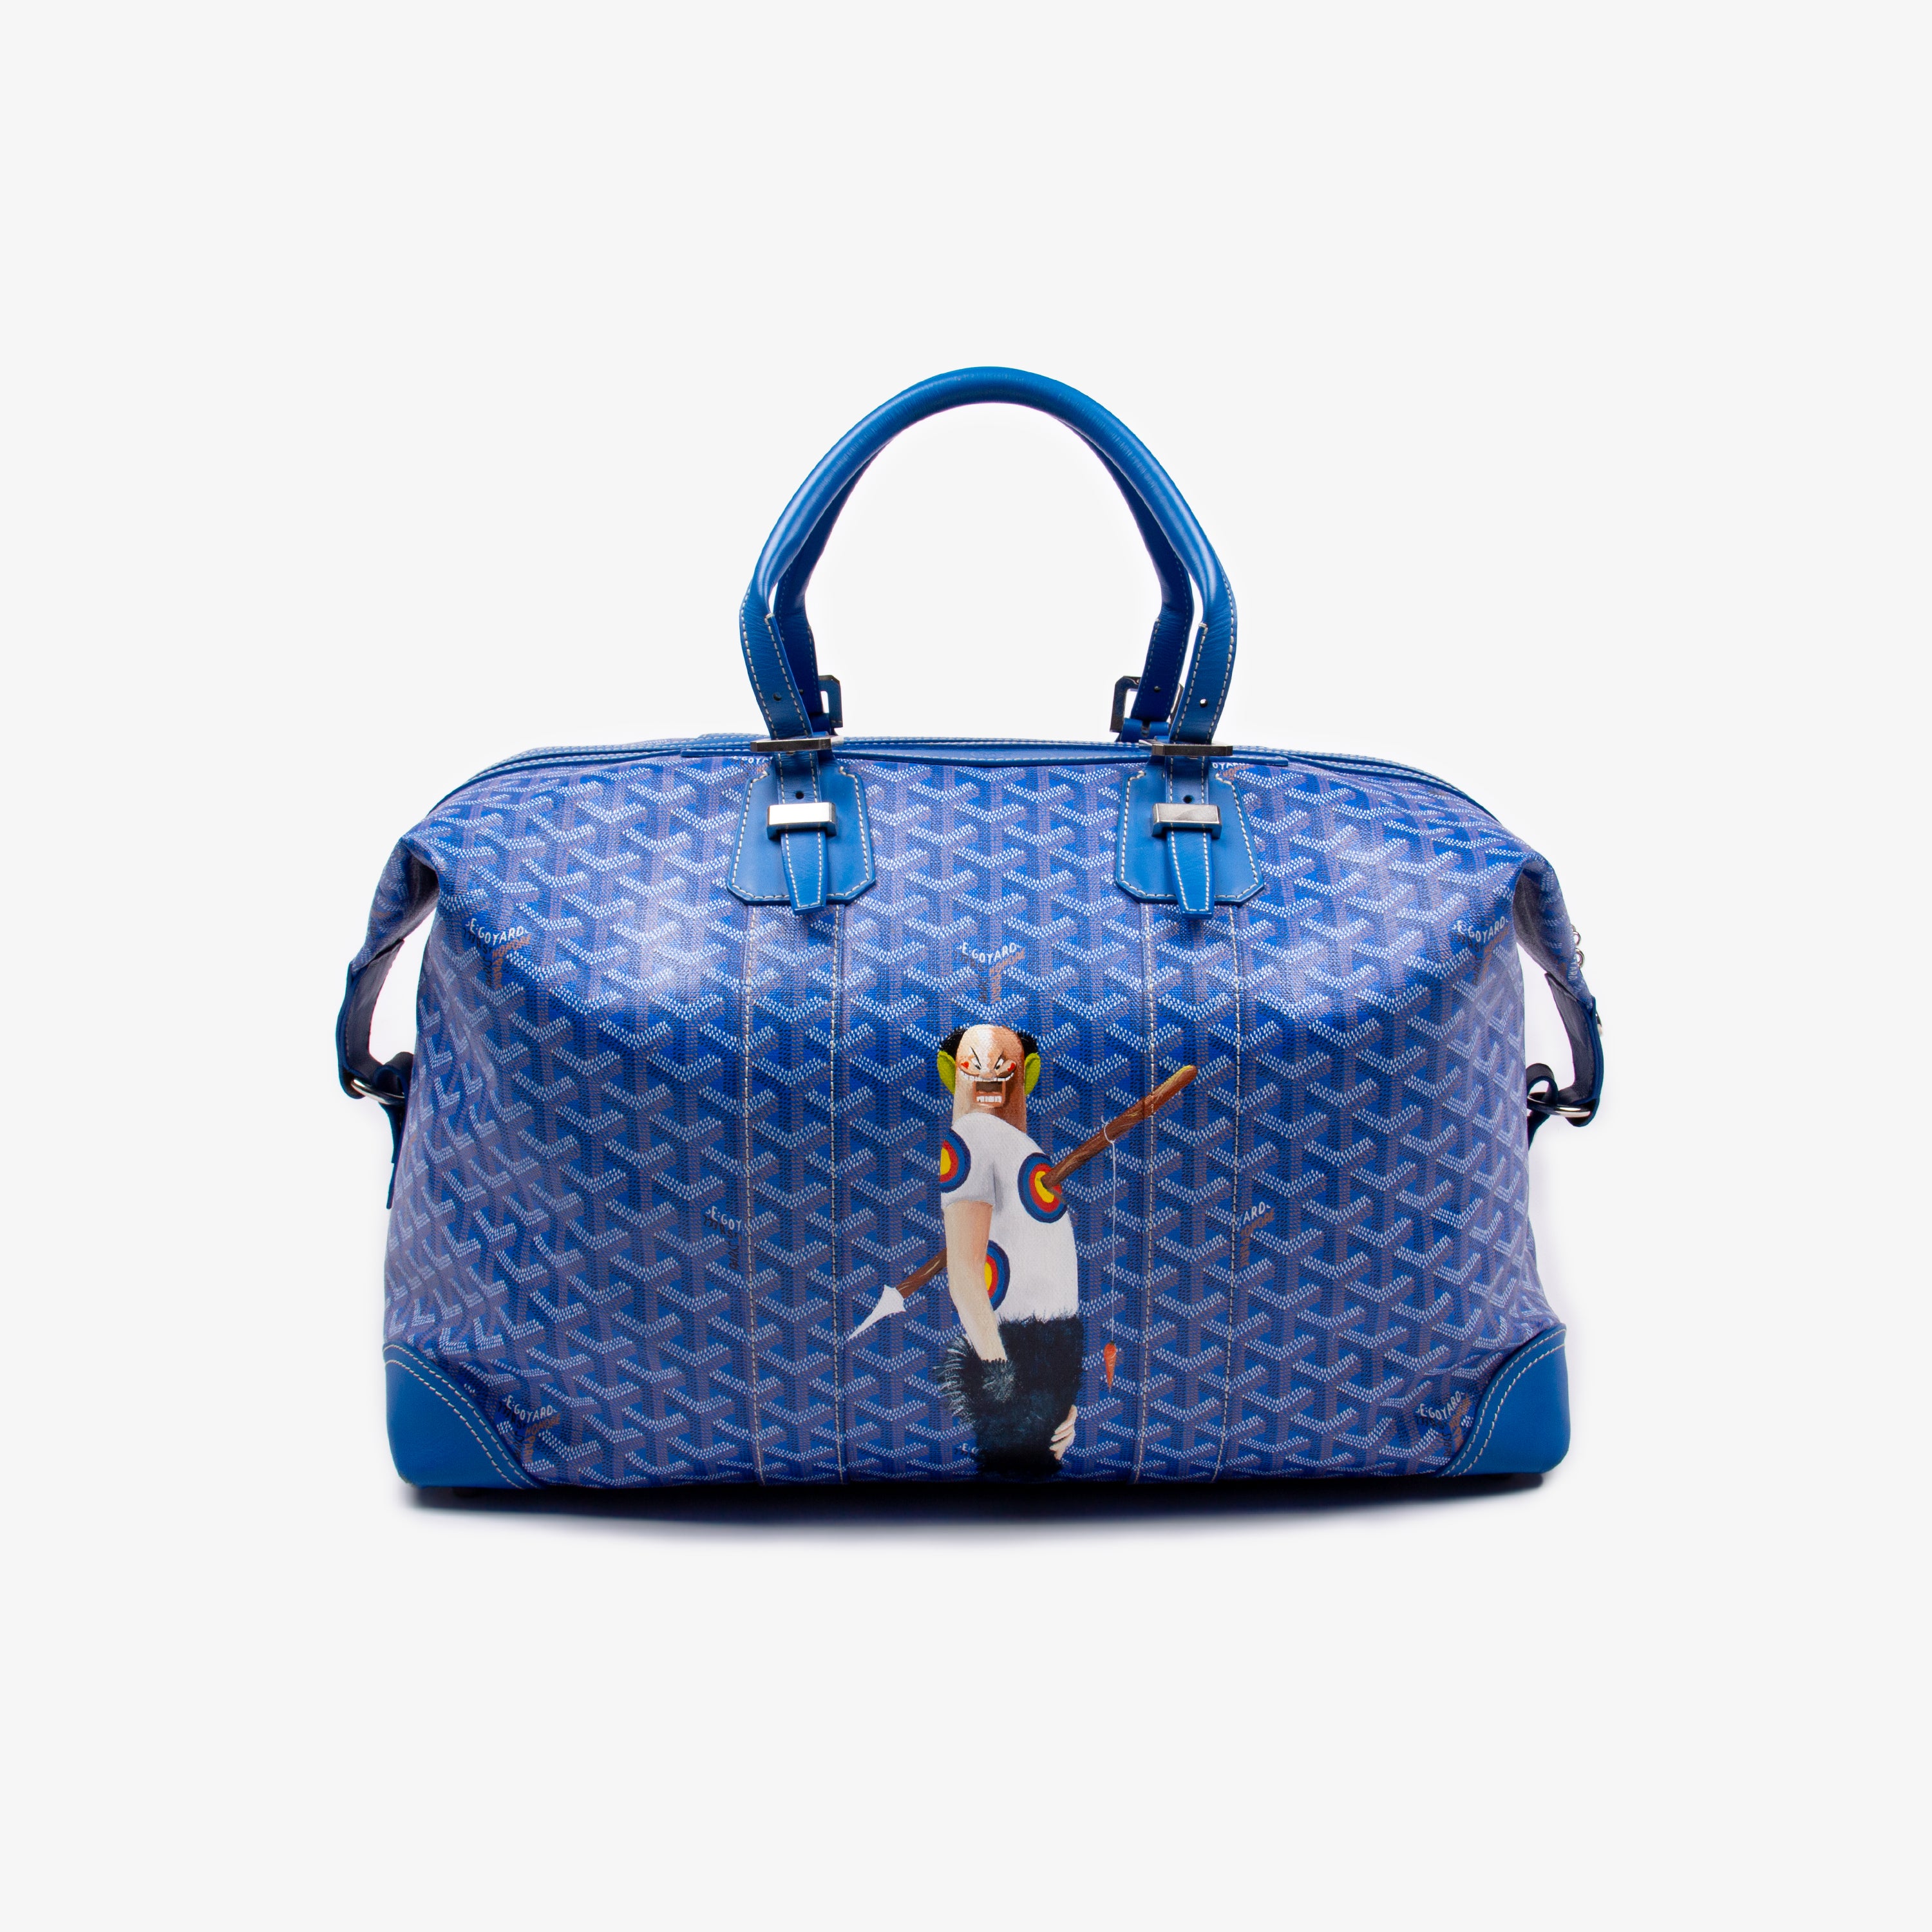 BLUE BOEING 45 DUFFLE SERVICED BY E